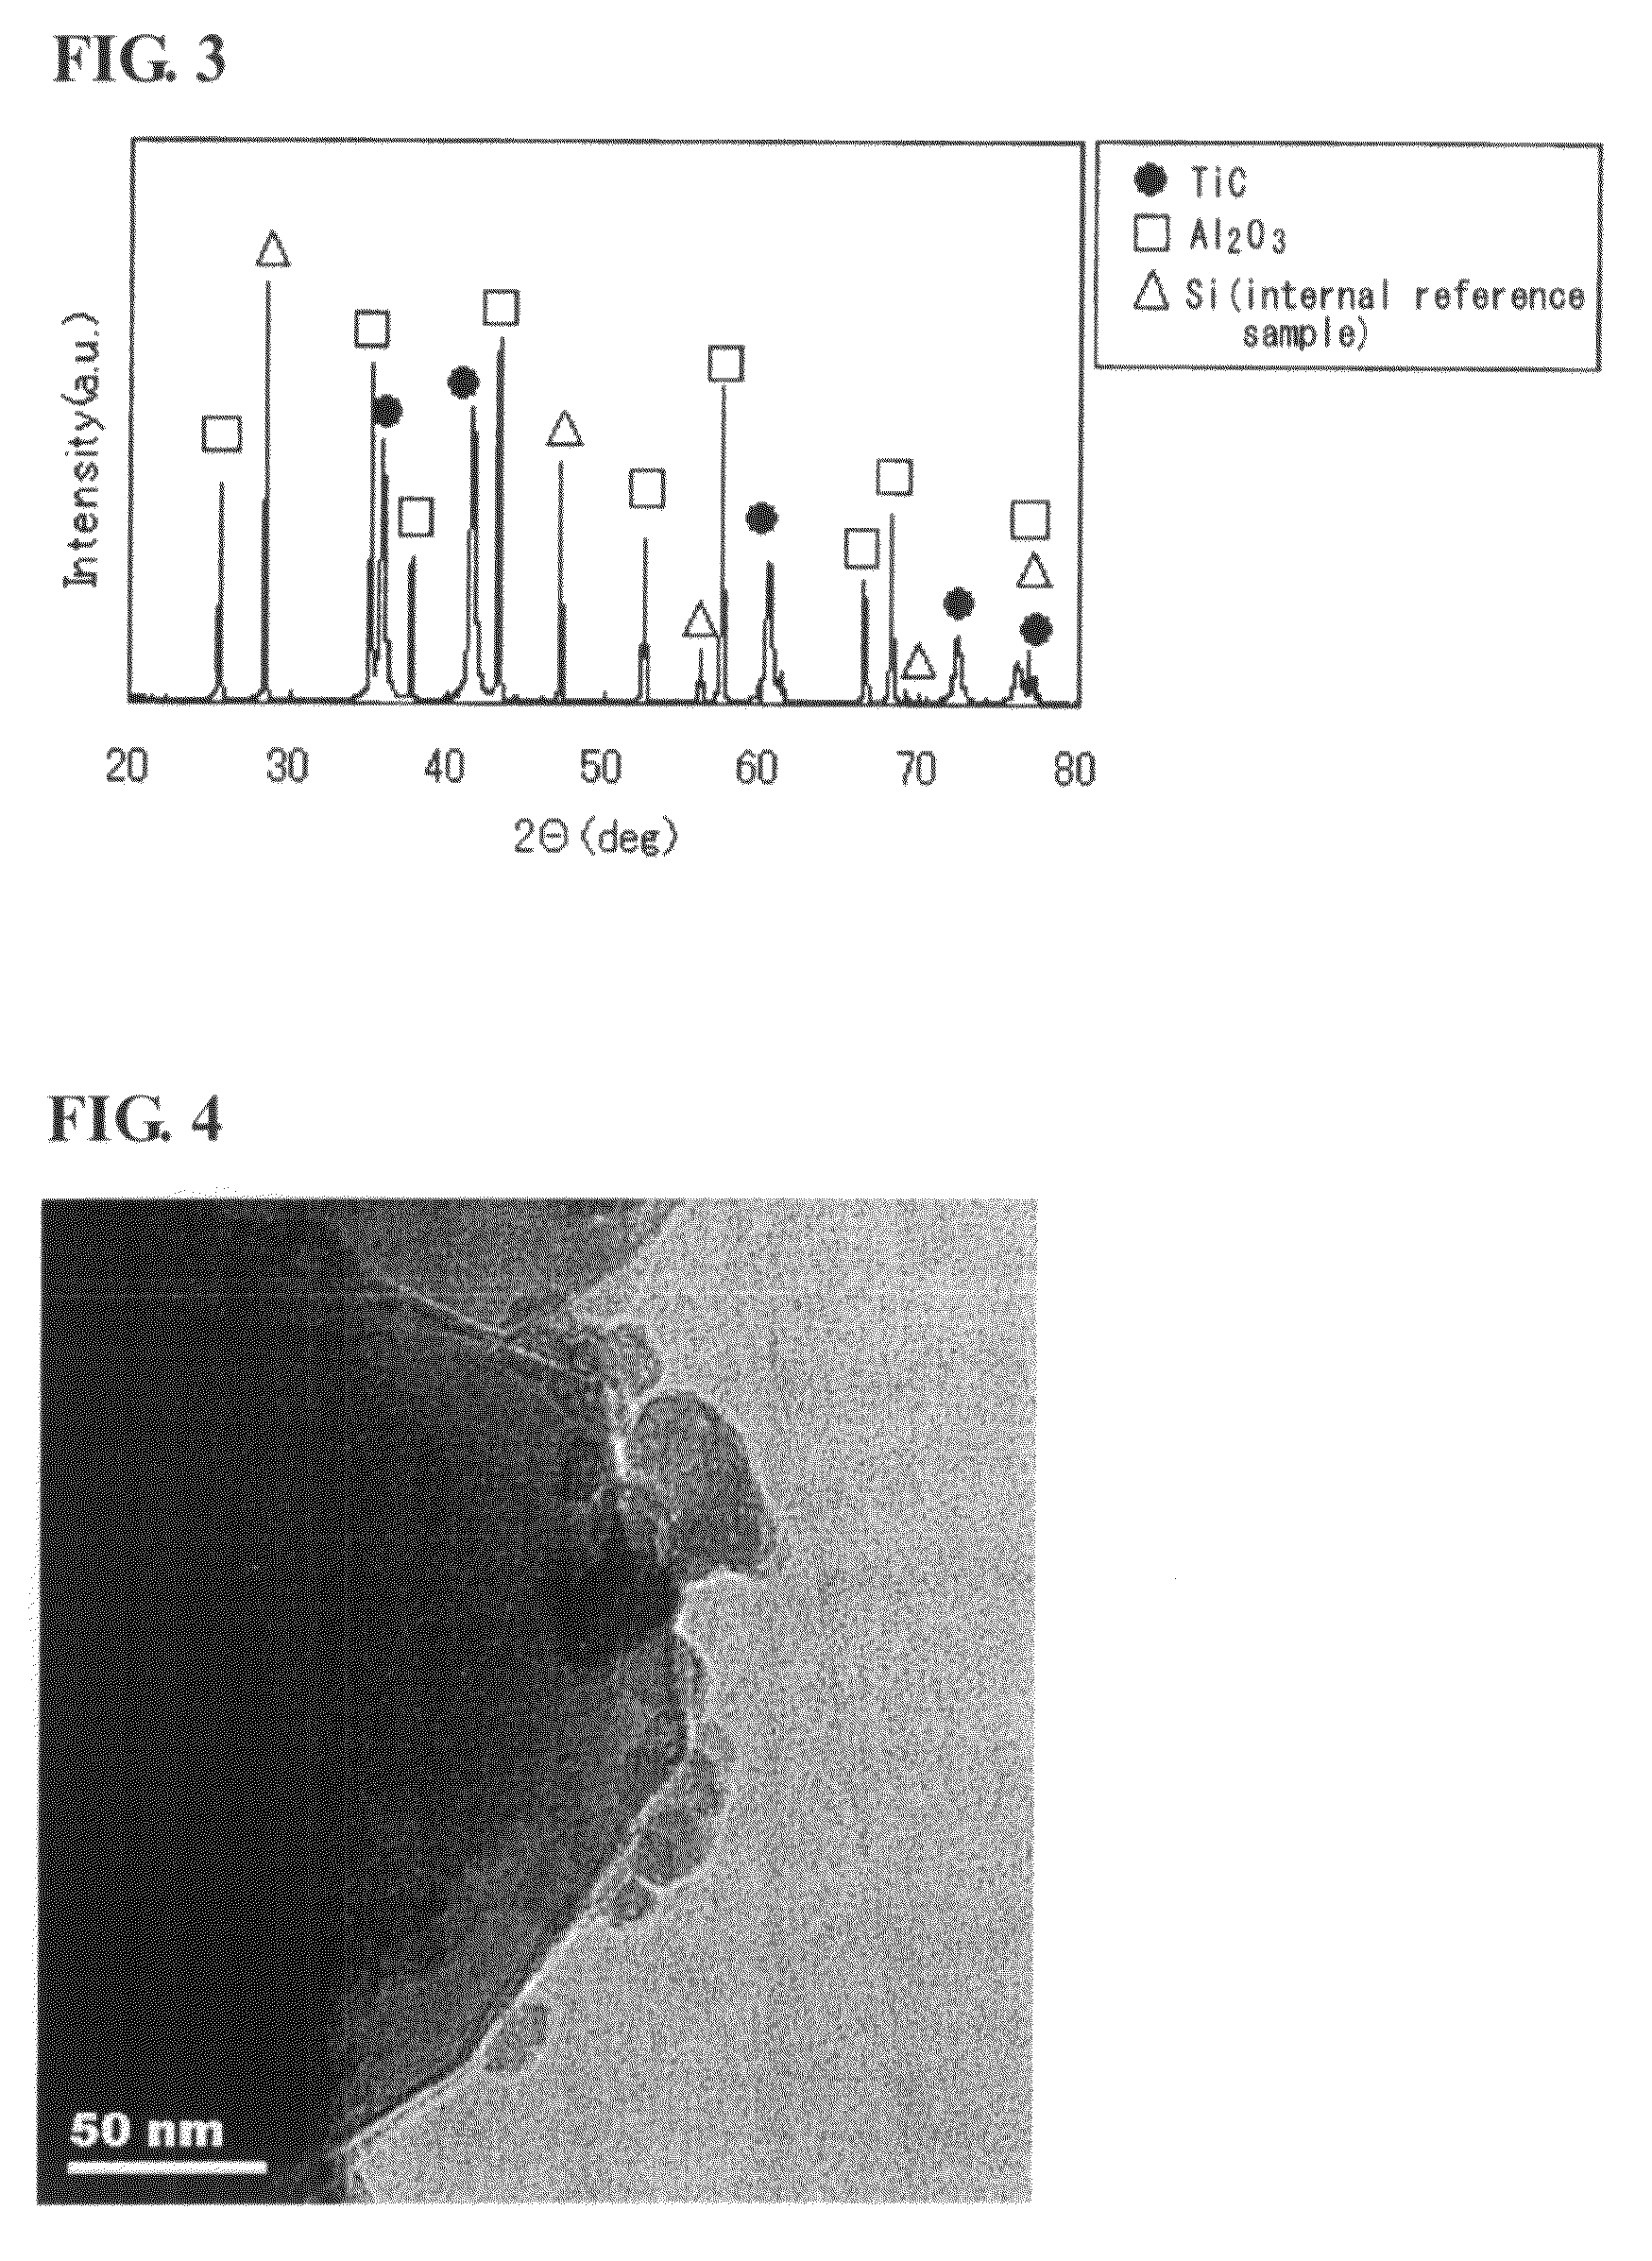 Titanium carbide powder and titanium carbide-ceramics composite powder and method for production thereof, and sintered compact from the titanium carbide powder and sintered compact from the titanium carbide/ceramics composite powders and method for production thereof